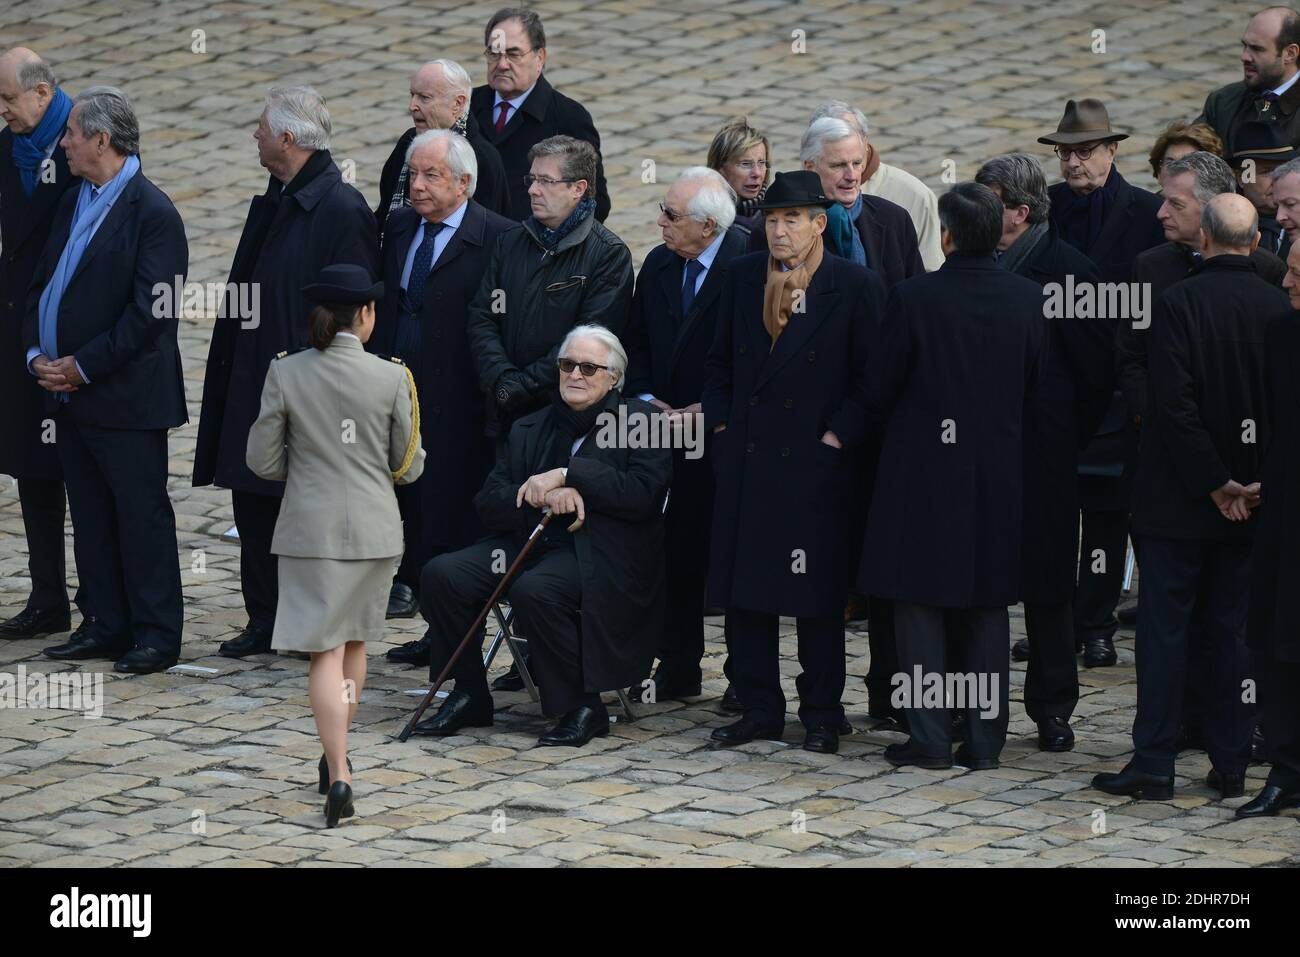 L-R : Jean-Louis Debre, Roland Dumas, Robert Badinter, Michel Barnier, Francois Fillon, Xavier Darcos, Alain Juppe, Herve Gaymard attend national tribute to Yves Guena, in the courtyard of the Invalides, in Paris, France on March 8, 2016. Photo by Ammar Abd Rabbo/ABACAPRESS.COM Stock Photo